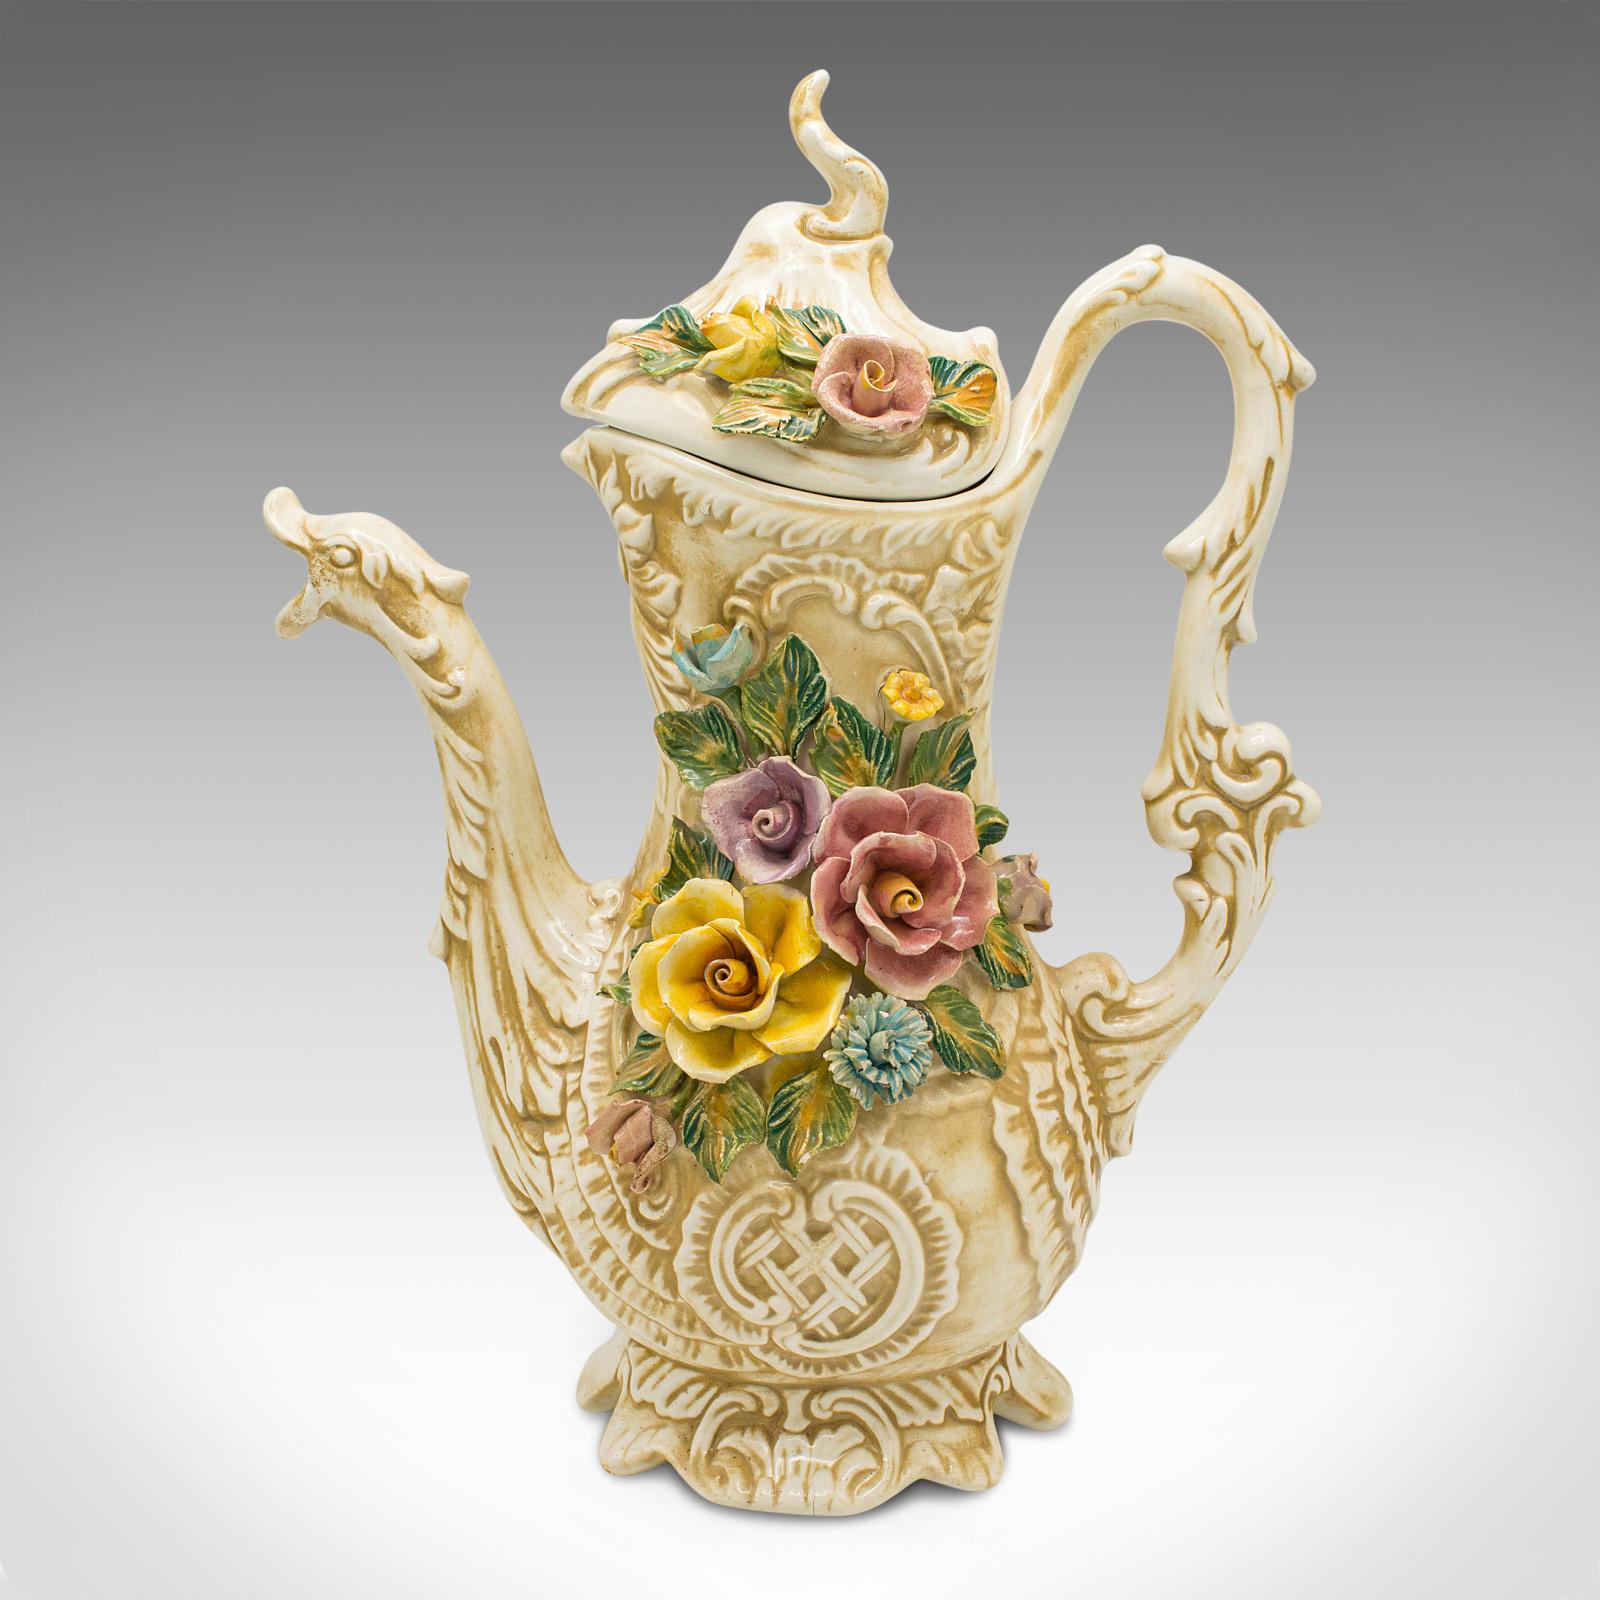 This is an antique floral encrusted ewer. An Italian, ceramic decorative pouring jug, dating to the early 20th century, circa 1920.

Striking Italian ewer with prominent foliate decorations
Displays a desirable aged patina and good original